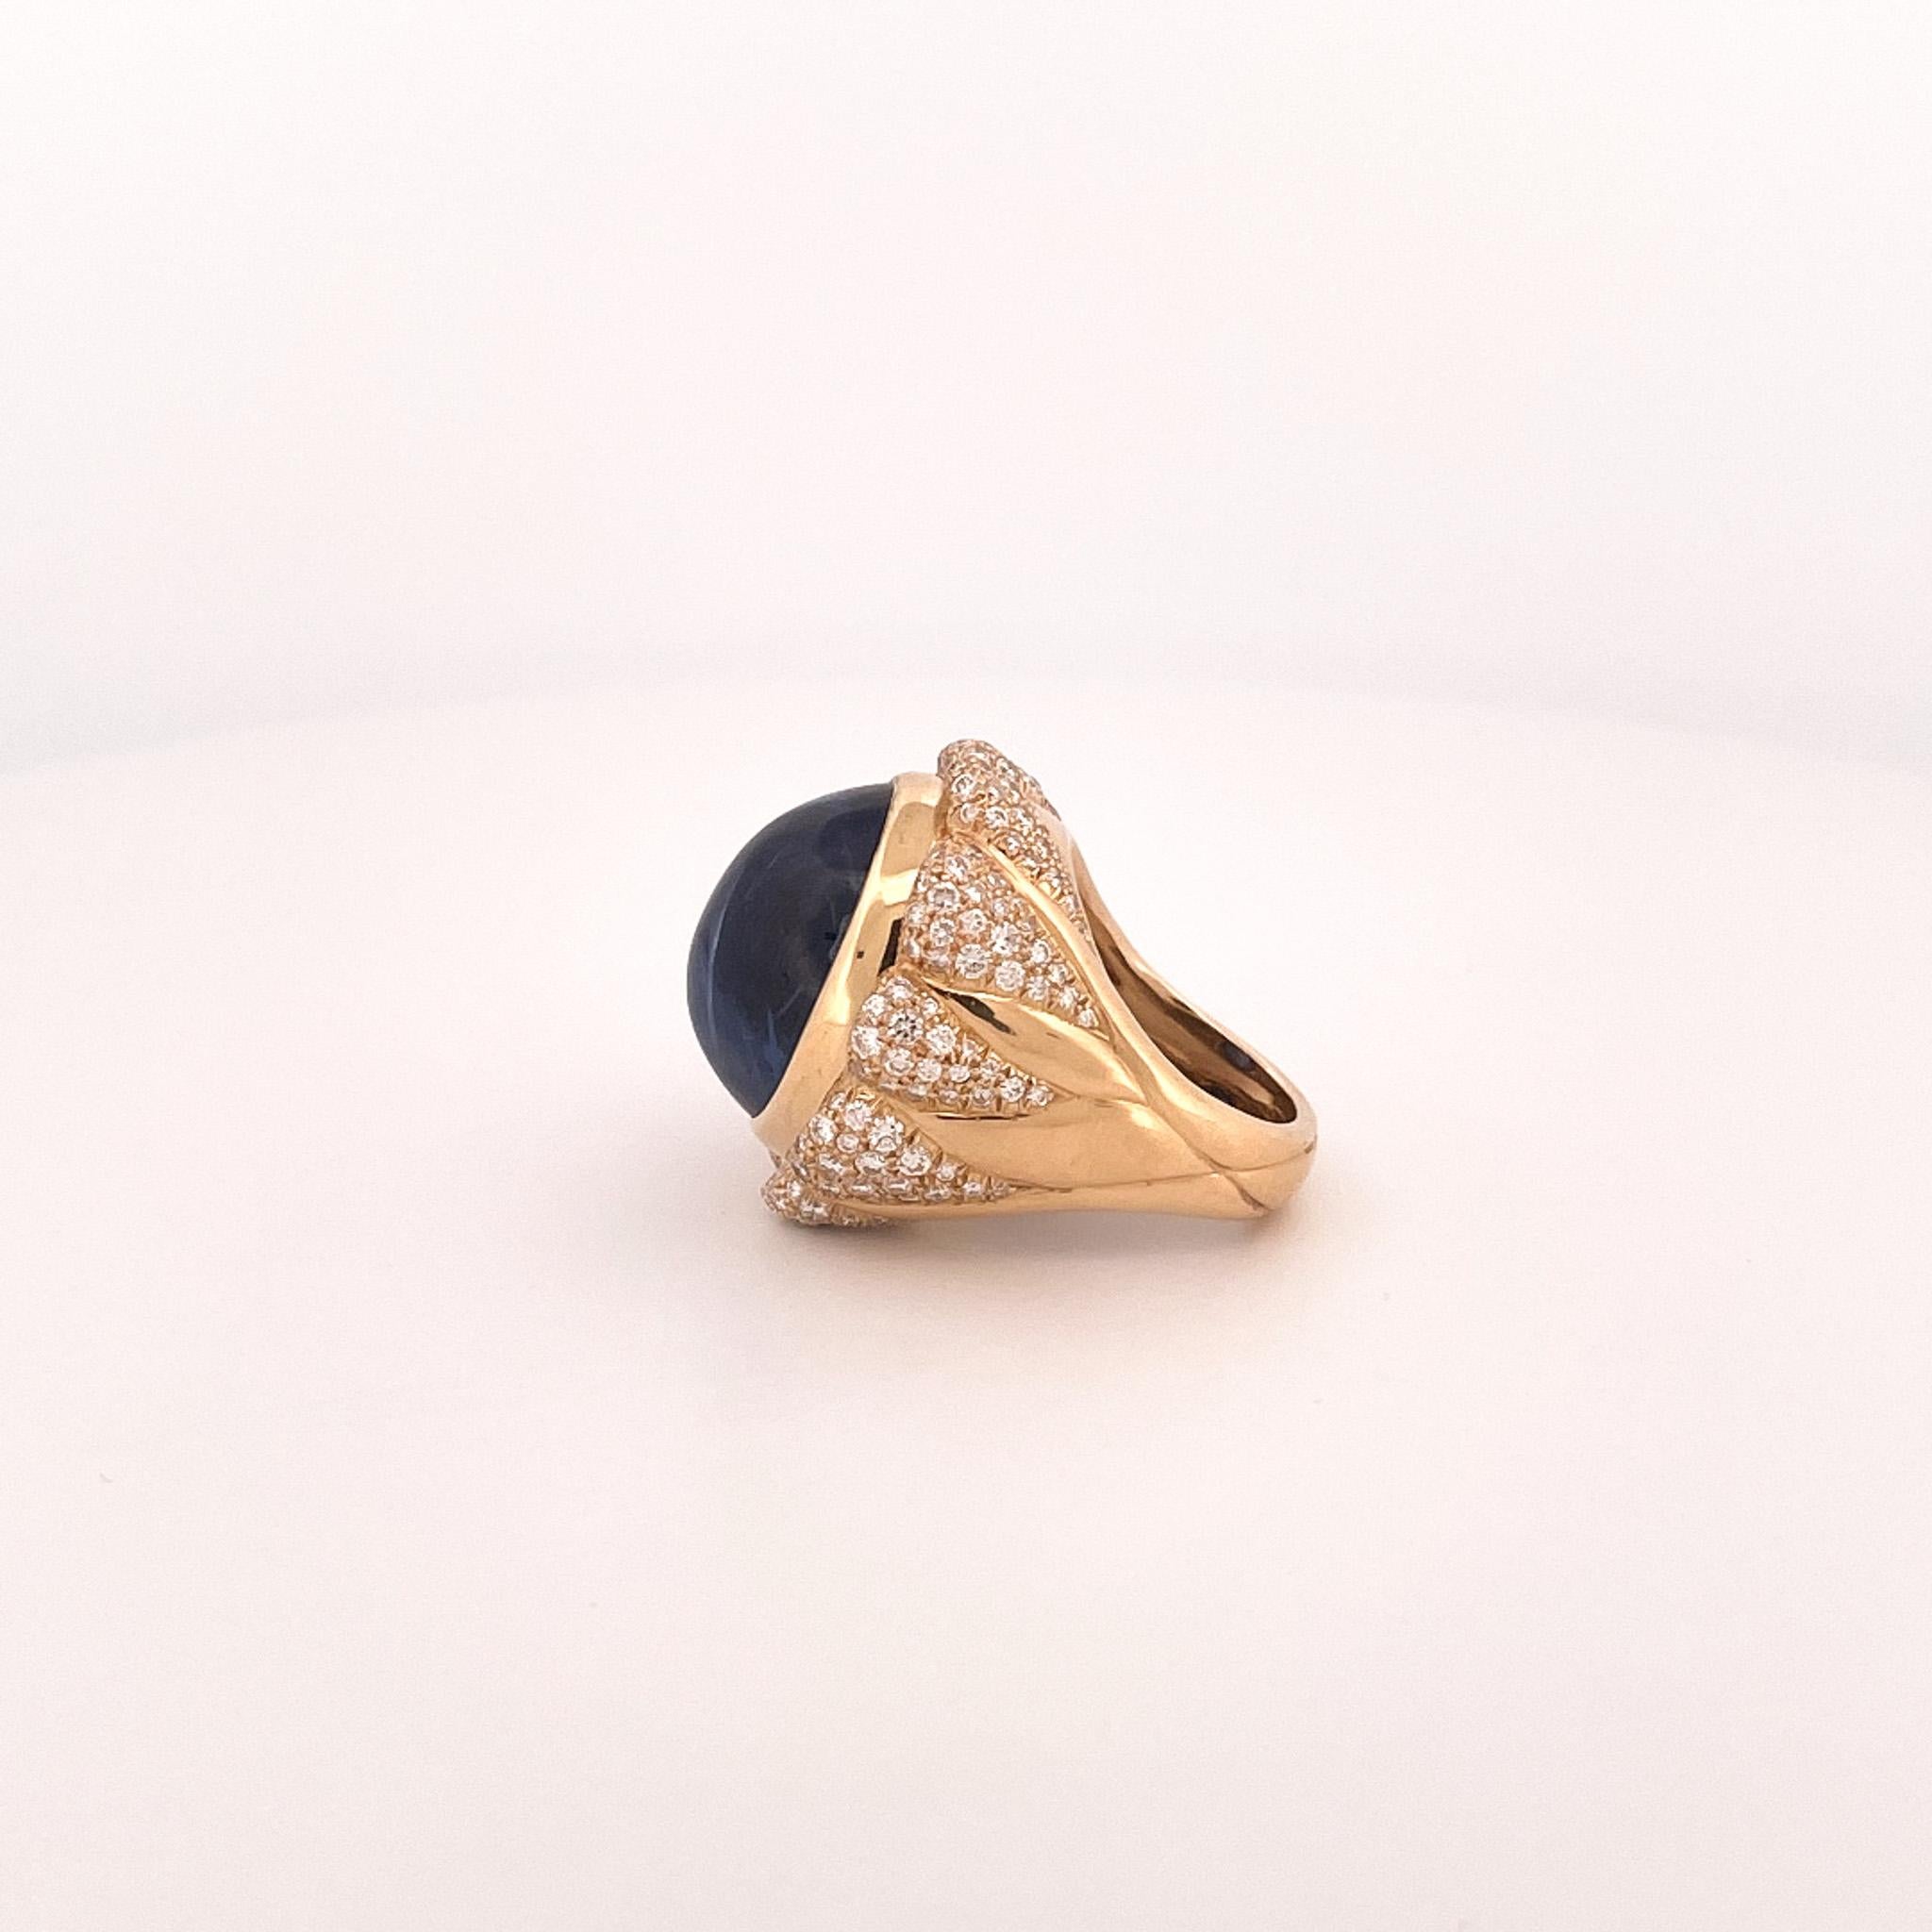 Julius Cohen 1980s 18k Yellow Gold Blue Sapphire & Diamond Cocktail Ring In Excellent Condition For Sale In Dallas, TX